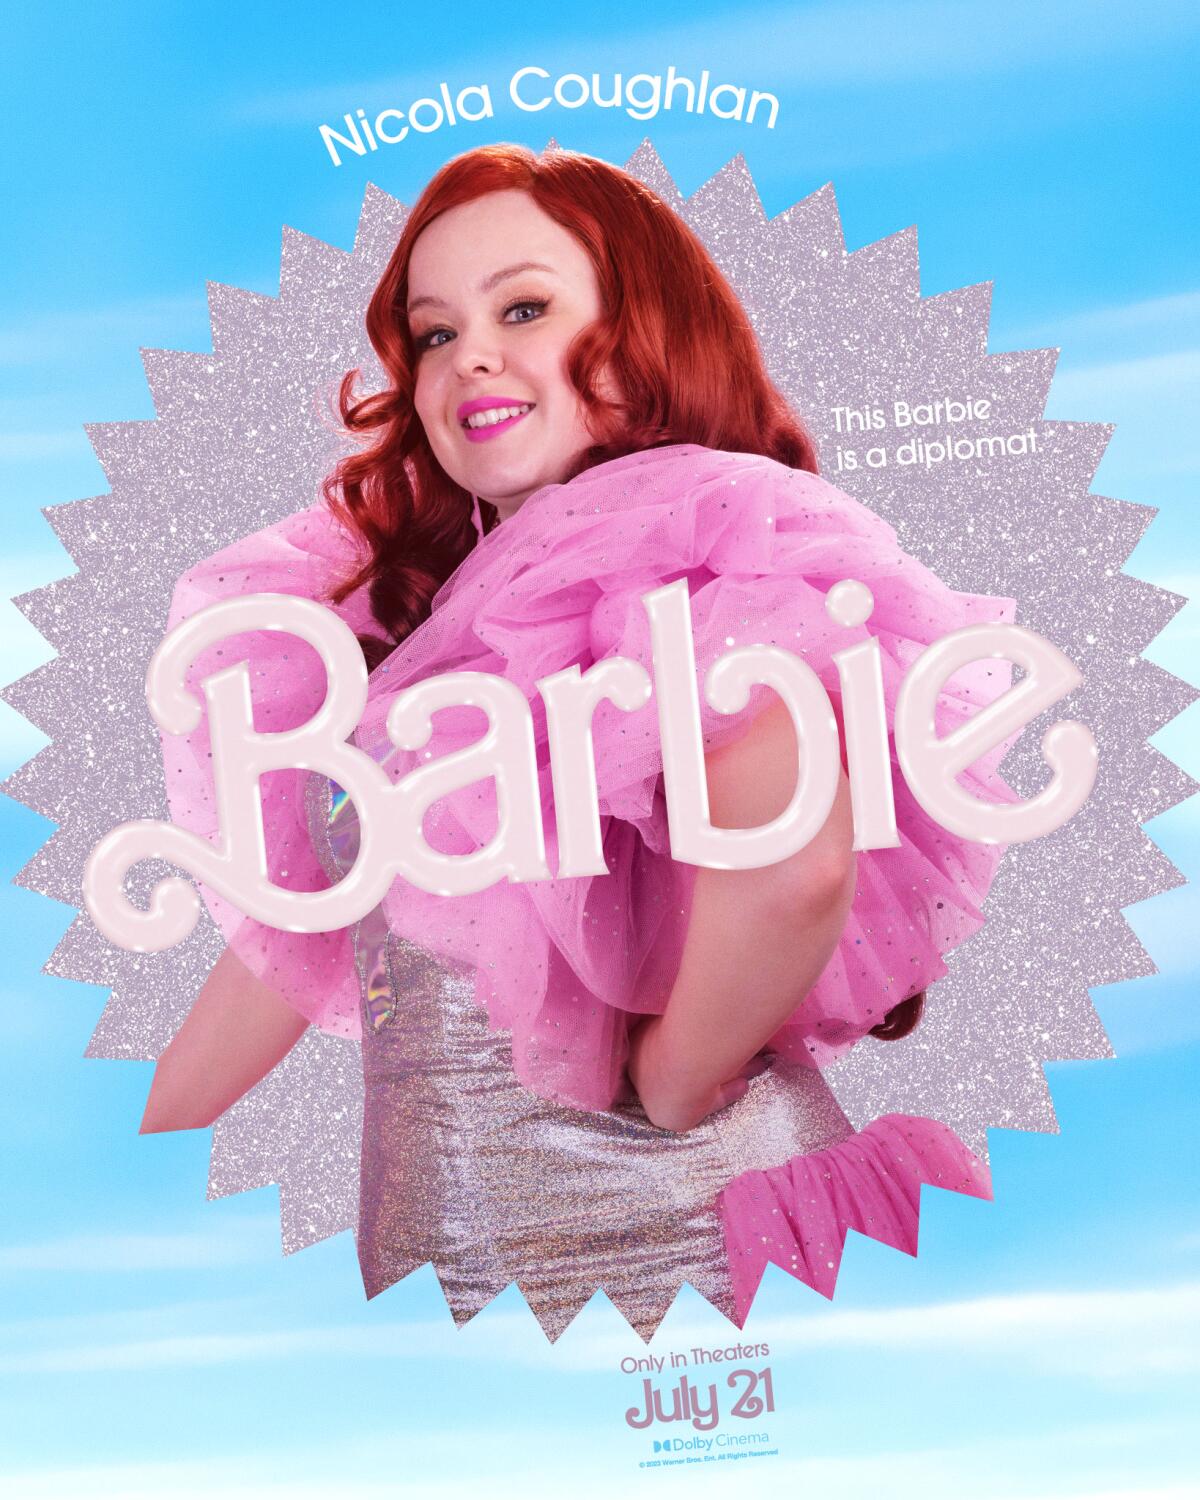 Nicola Coughlan smiles and places her hand on her hip in a "Barbie" movie poster. She wears a silver dress with poofy sleeves